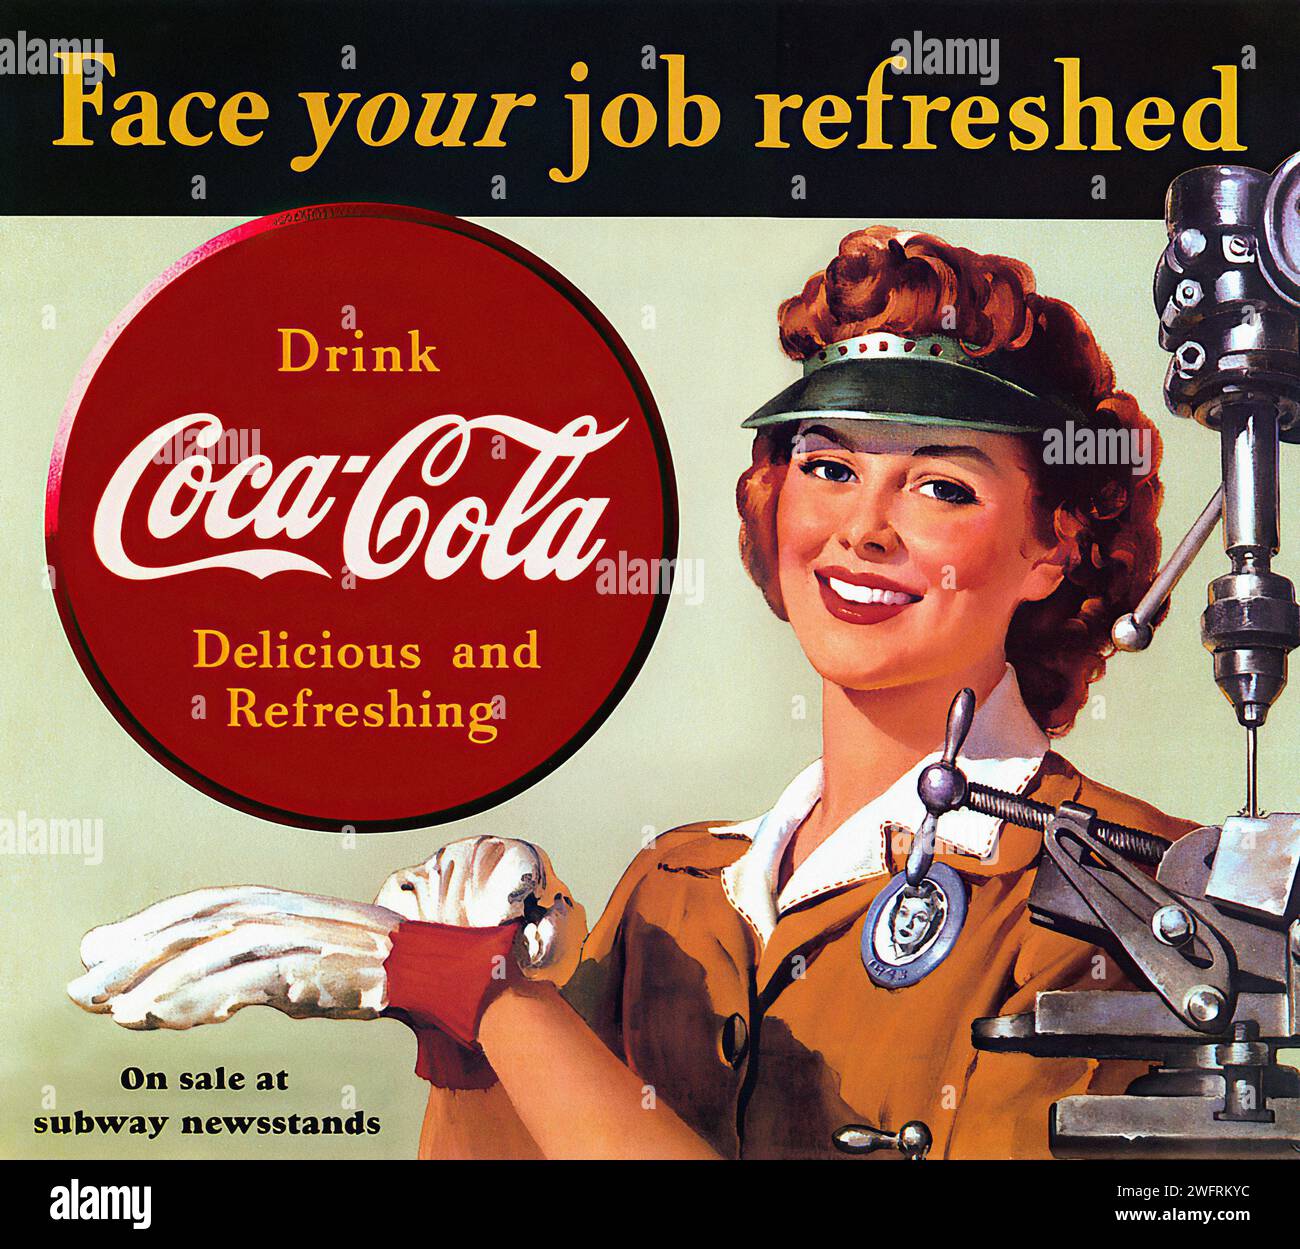 “FACE YOUR JOB REFRESHED DRINK COCA-COLA DELICIOUS AND REFRESHING ON SALE AT SUBWAY NEWSSTANDS”  A vintage American advertisement for Coca-Cola during World War II. The image, rendered in a retro graphic style, features a woman in a brown uniform holding a Coca-Cola bottle against a mustard yellow background. The woman stands in front of a large red circle with the Coca-Cola logo and the slogan “Delicious and Refreshing” written in white. Above the red circle, the text “Face your job refreshed” is written in white, and below it, “On sale at subway newsstands” is also written in white. - Americ Stock Photo